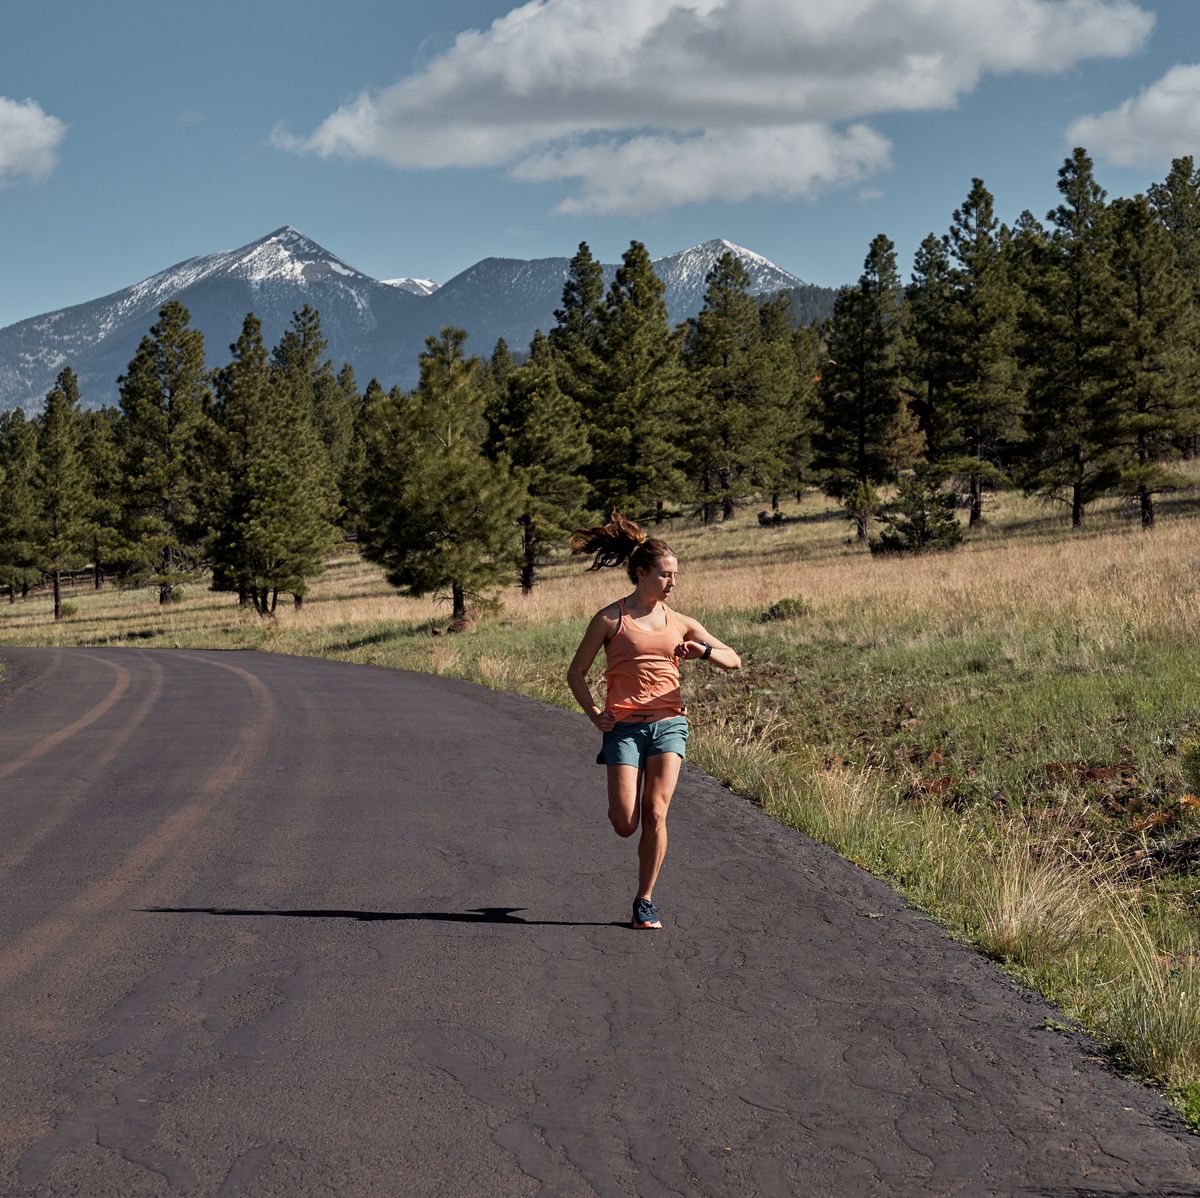 How To Use Speed Workouts to Run Faster – TrainwithMarc